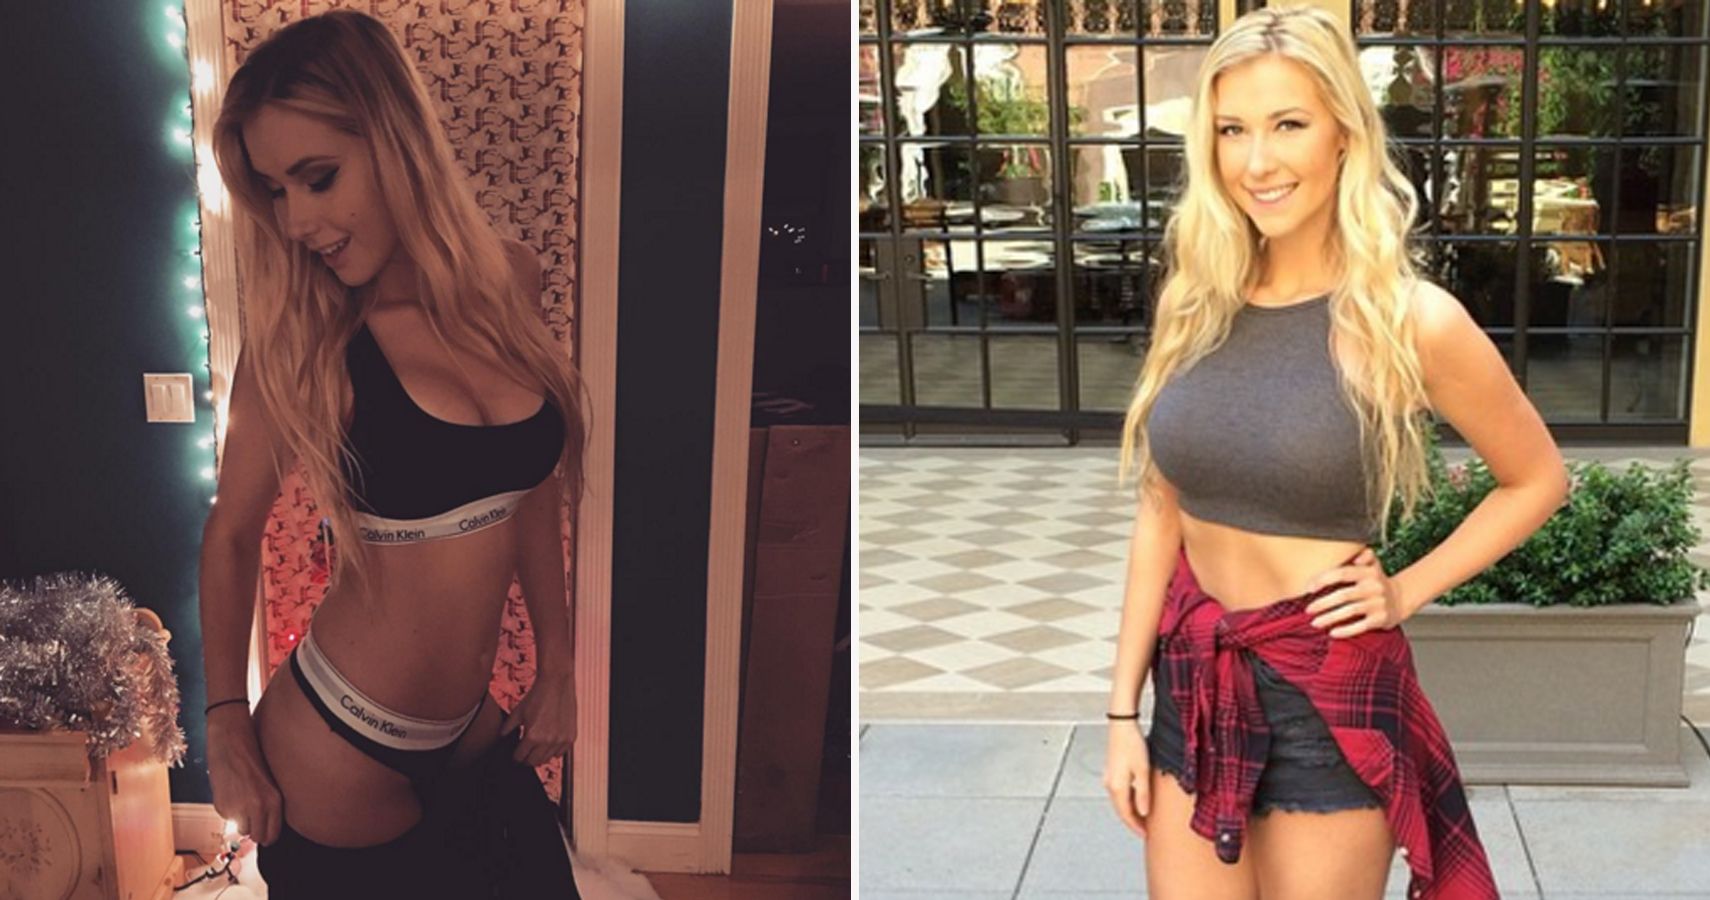 Top 15 Hot Photos of Noelle Foley That You NEED To See.